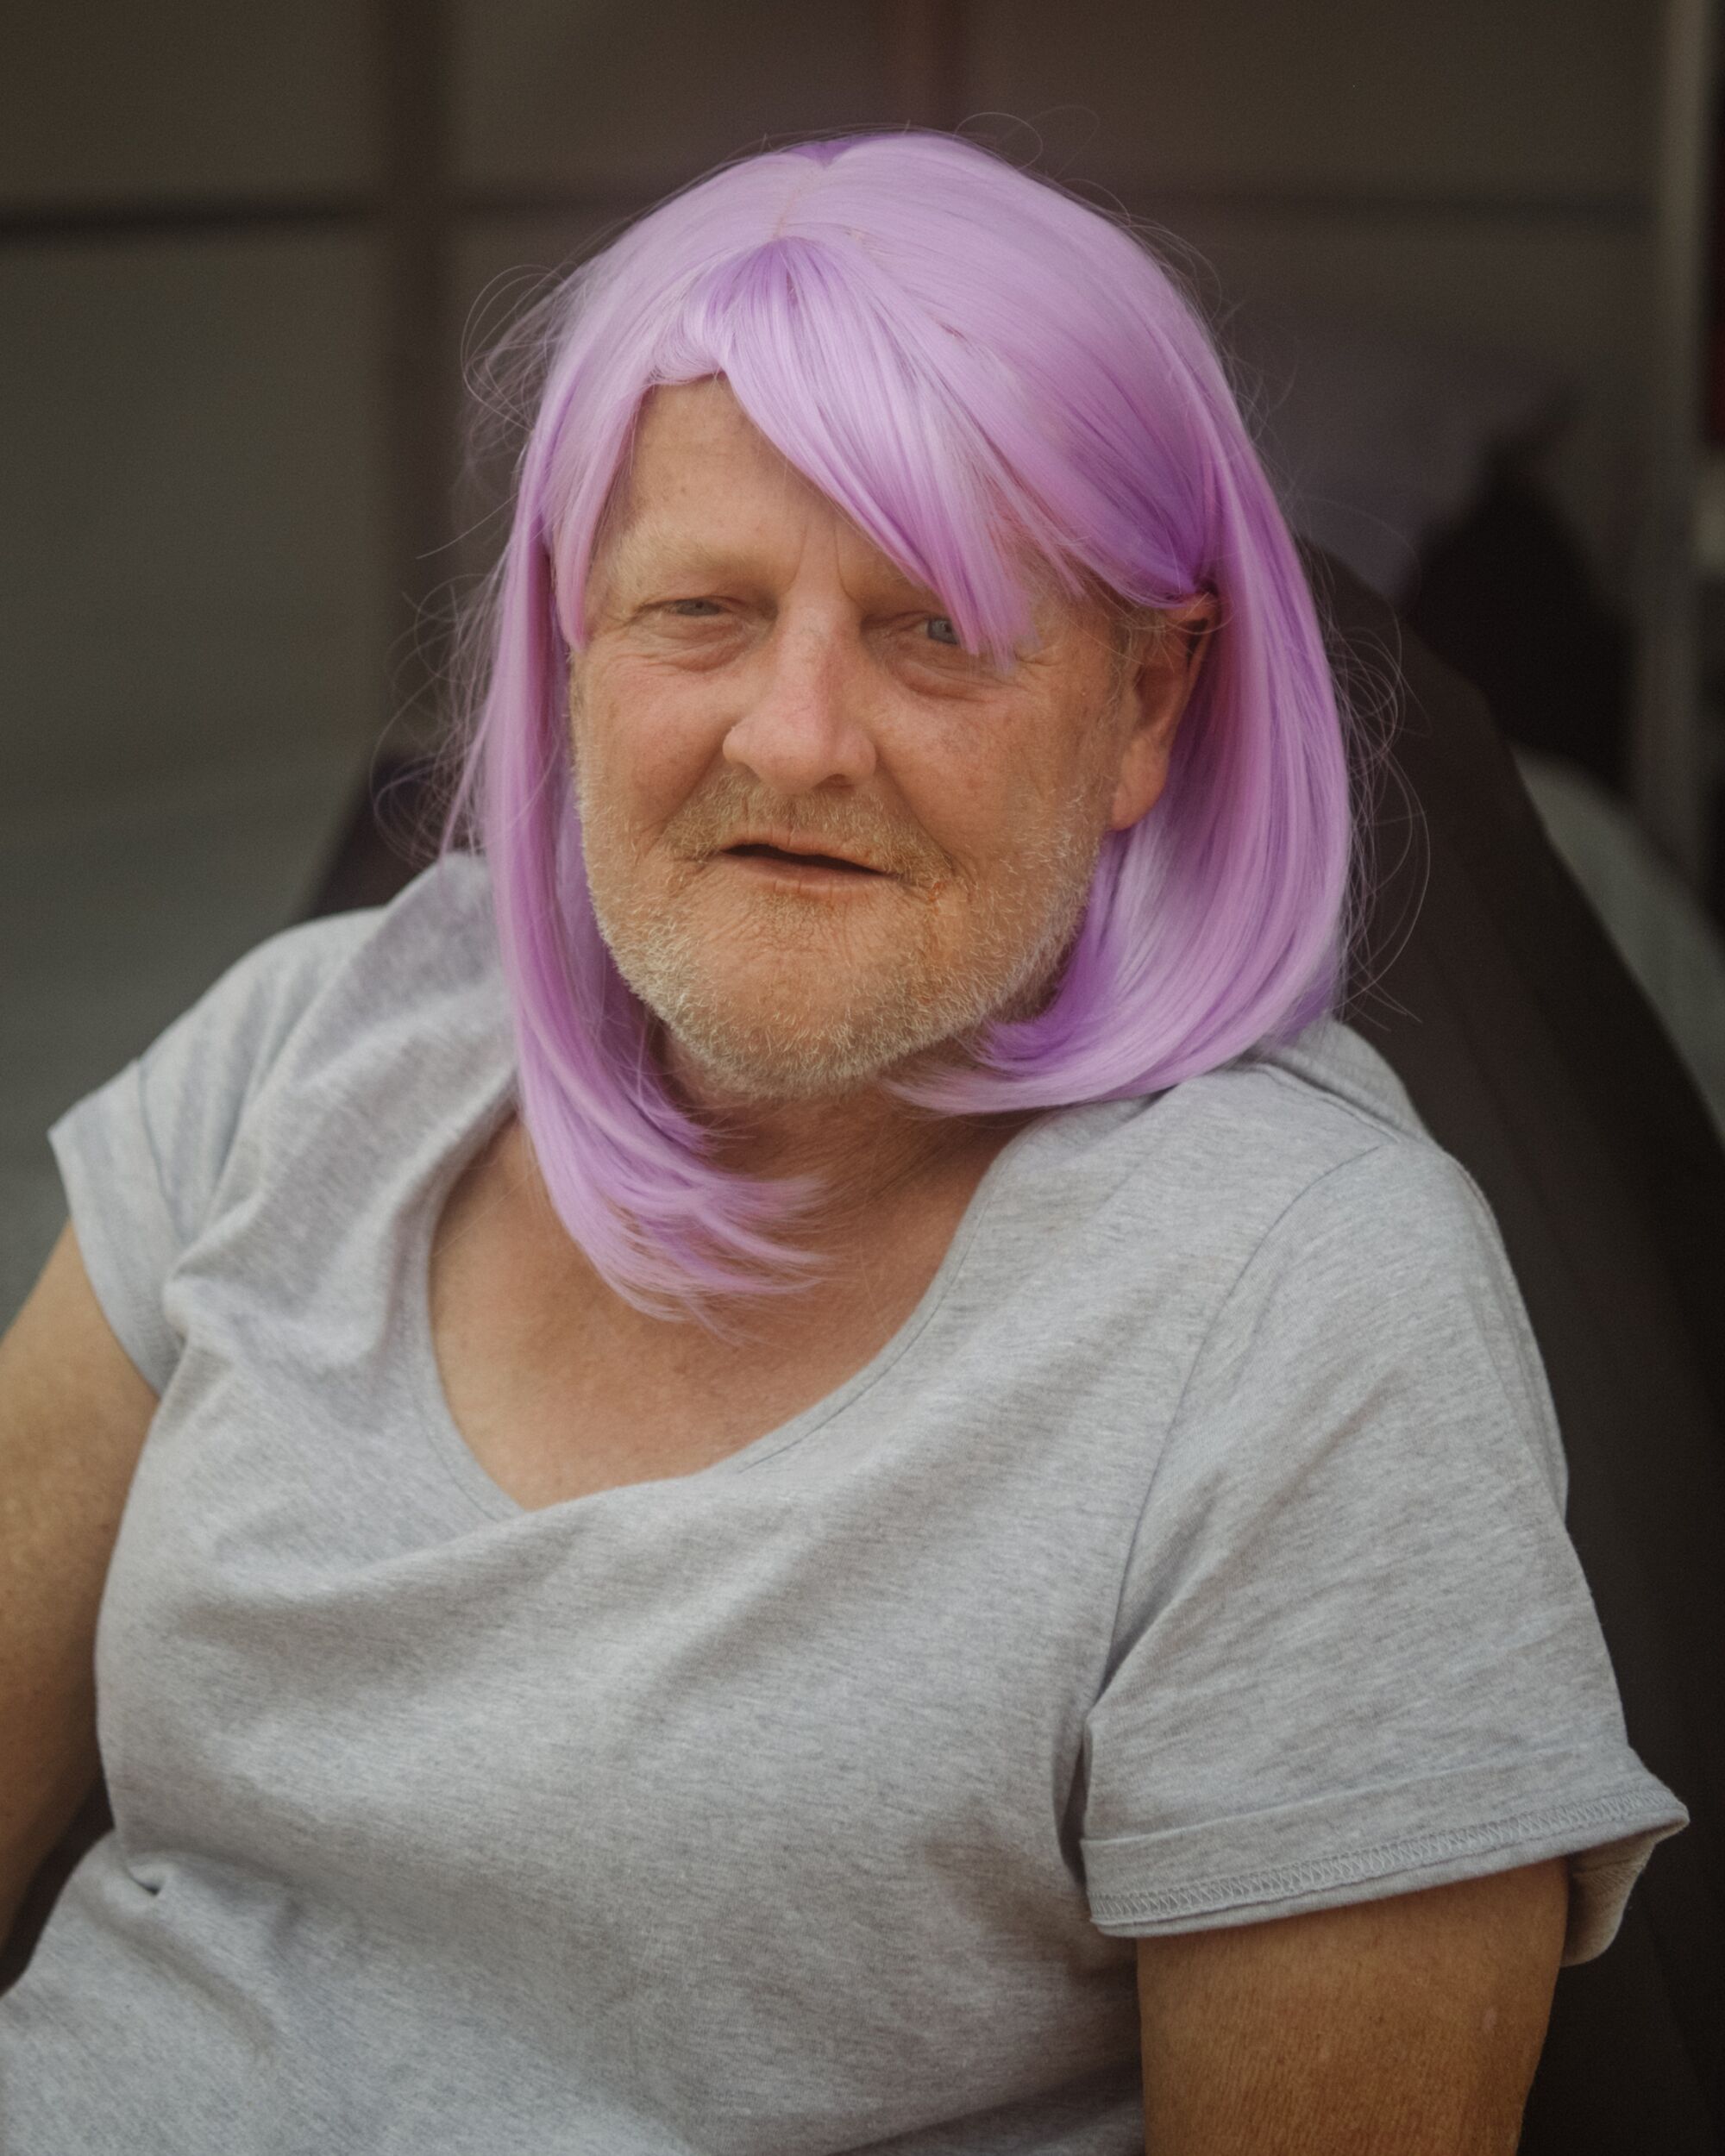 Portrait of a person wearing a light purple wig and a gray T-shirt